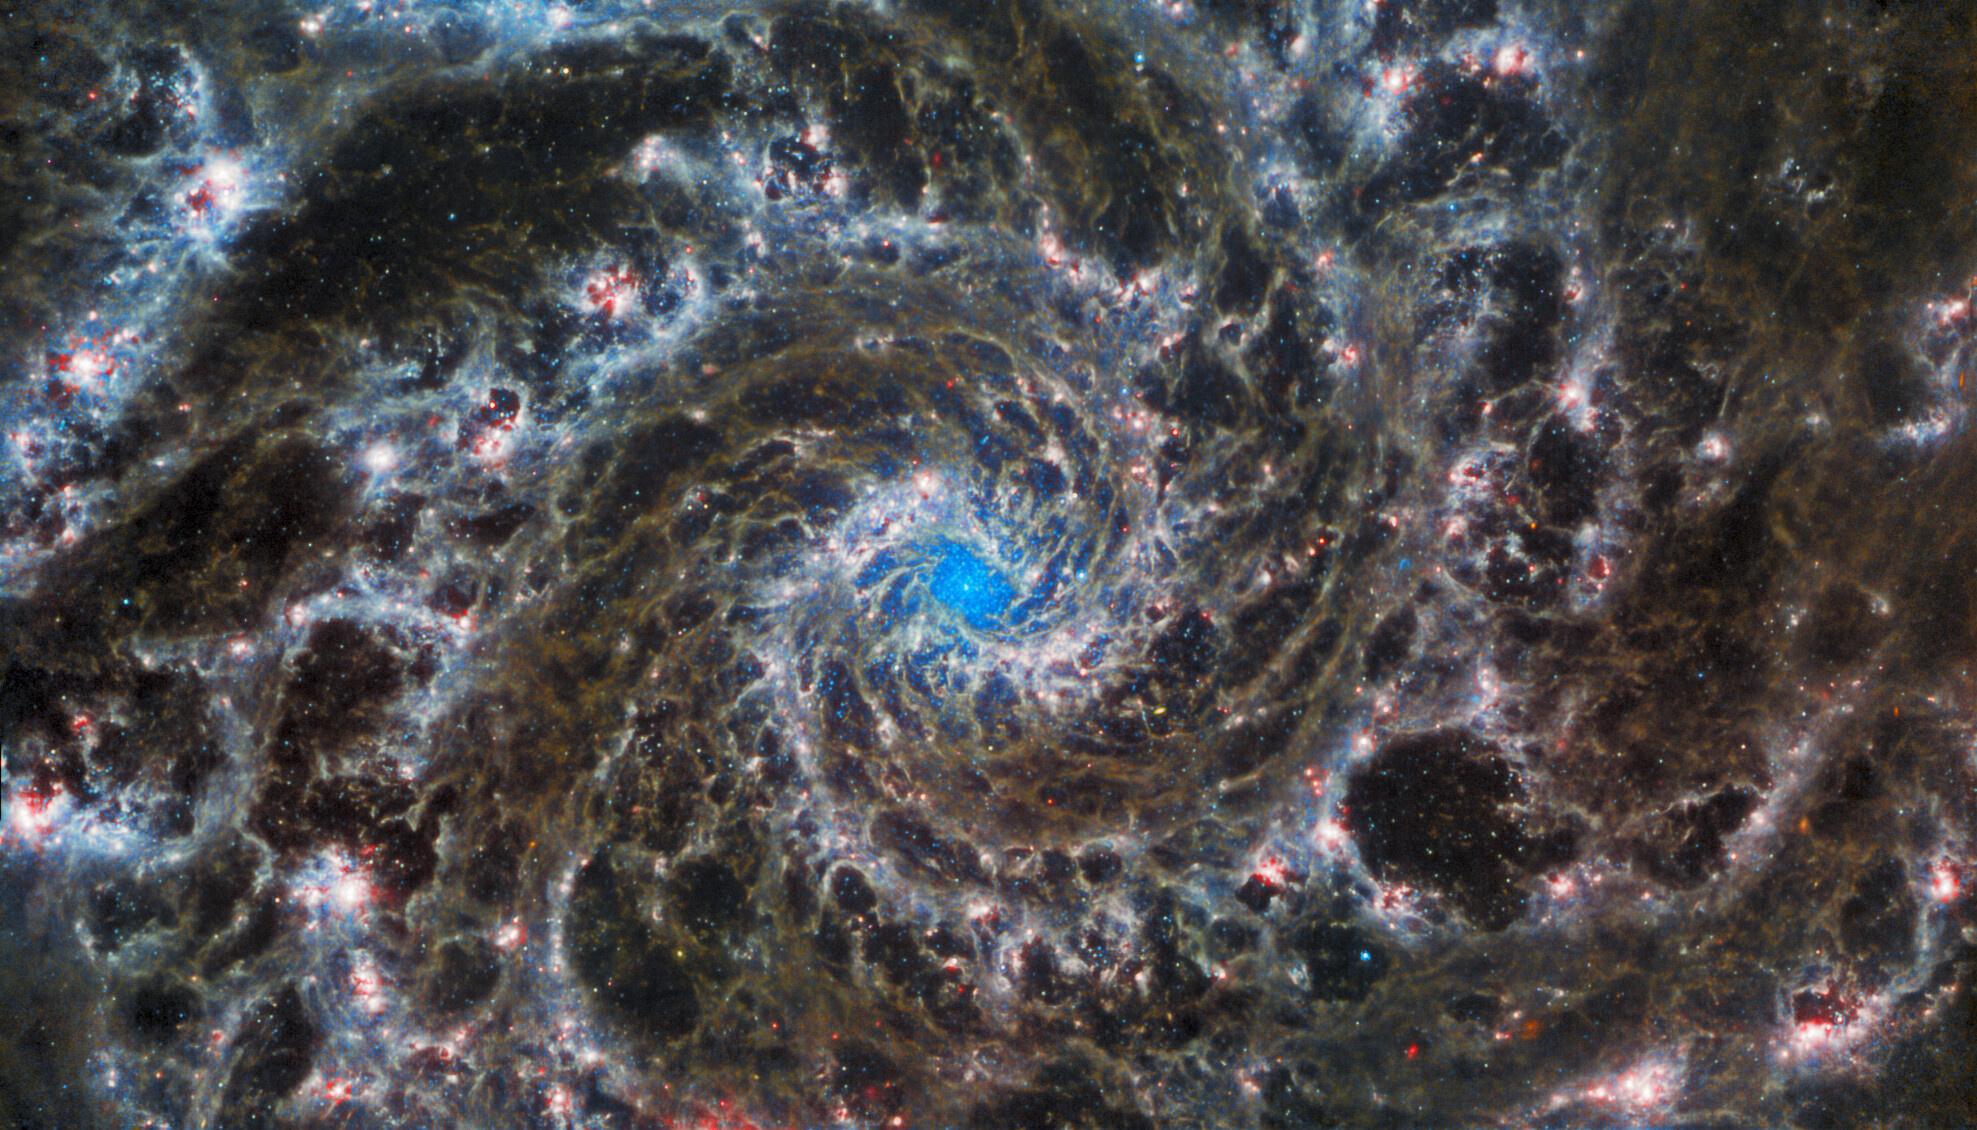 This image from the NASA/ESA/CSA James Webb Space Telescope shows the heart of M74, otherwise known as the Phantom Galaxy. Webb’s sharp vision has revealed delicate filaments of gas and dust in the grandiose spiral arms which wind outwards from the centre of this image. A lack of gas in the nuclear region also provides an unobscured view of the nuclear star cluster at the galaxy's centre. M74 is a particular class of spiral galaxy known as a ‘grand design spiral’, meaning that its spiral arms are prominent and well-defined, unlike the patchy and ragged structure seen in some spiral galaxies. ESA/Webb, NASA & CSA, J. Lee and the PHANGS-JWST Team. Acknowledgement: J. Schmidt